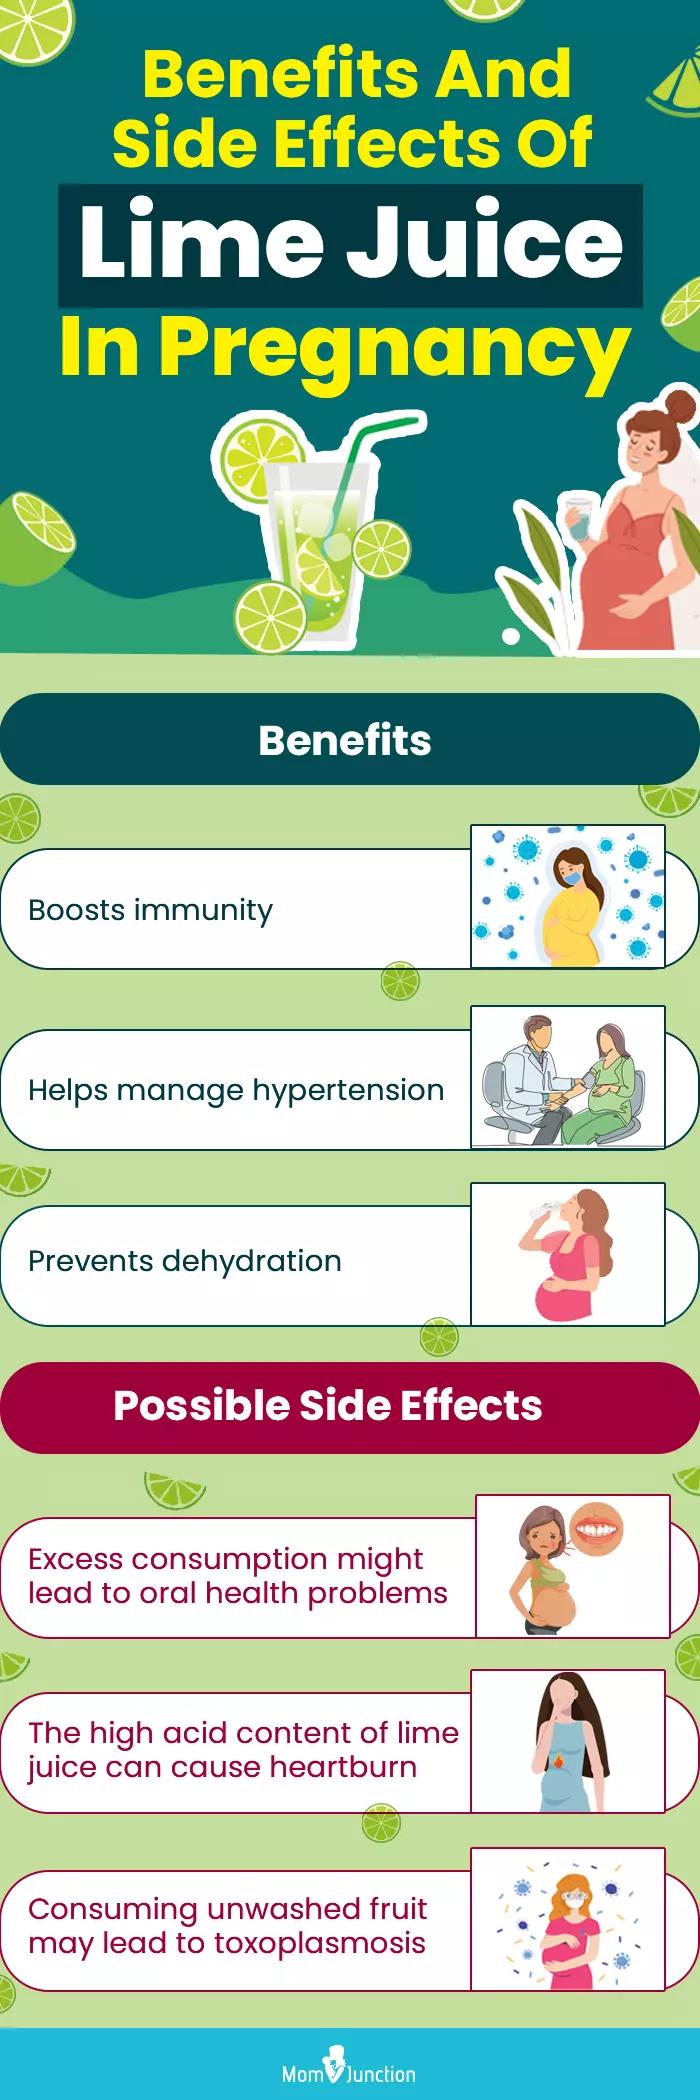 benefits and side effects of lime juice in pregnancy (infographic)